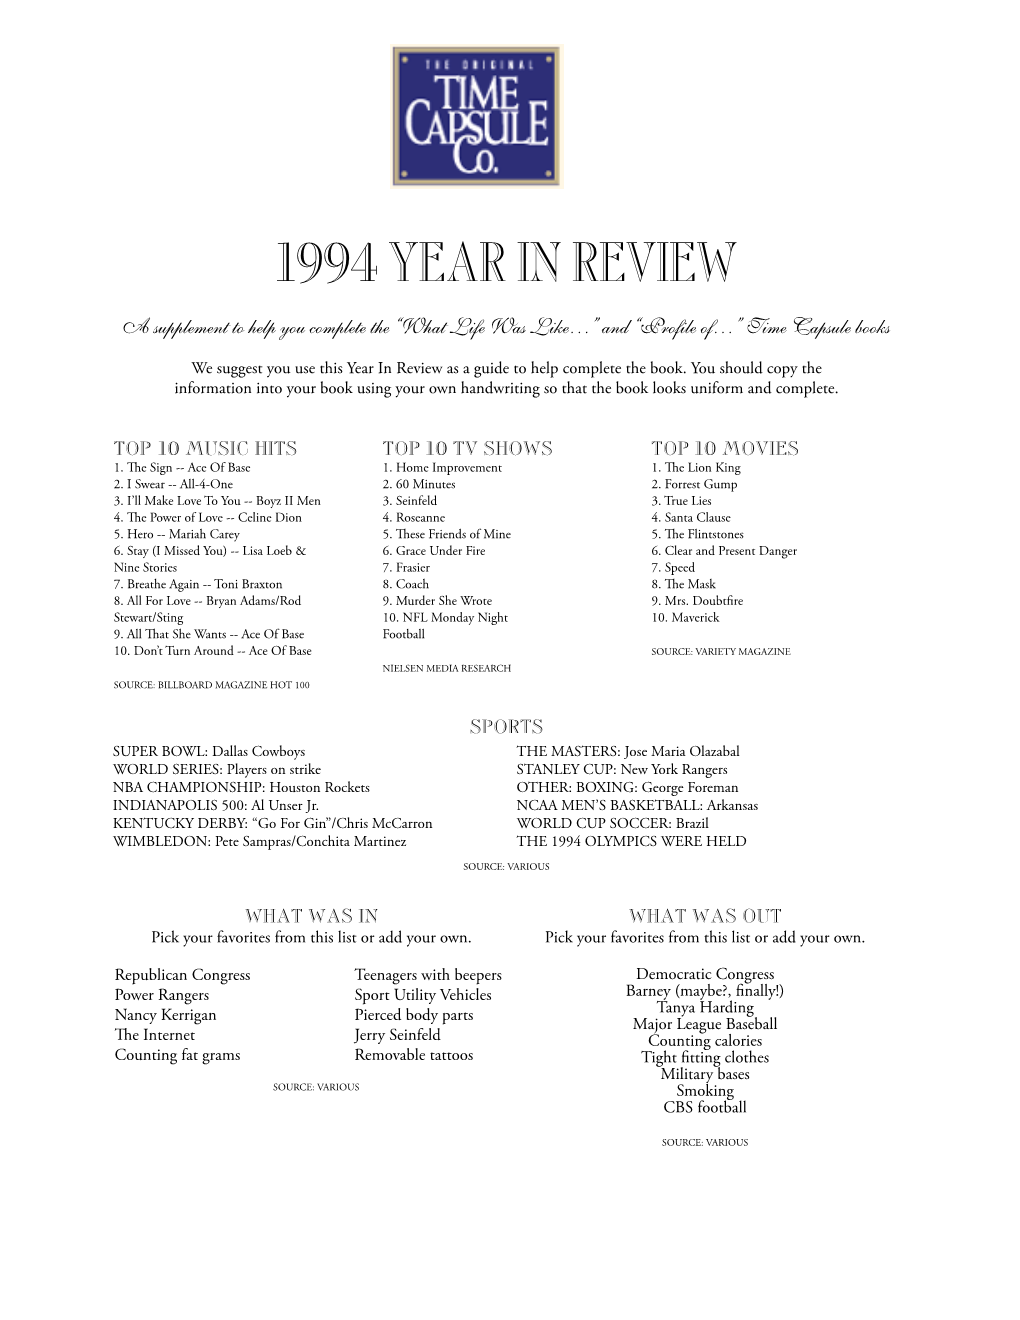 1994Year in Review